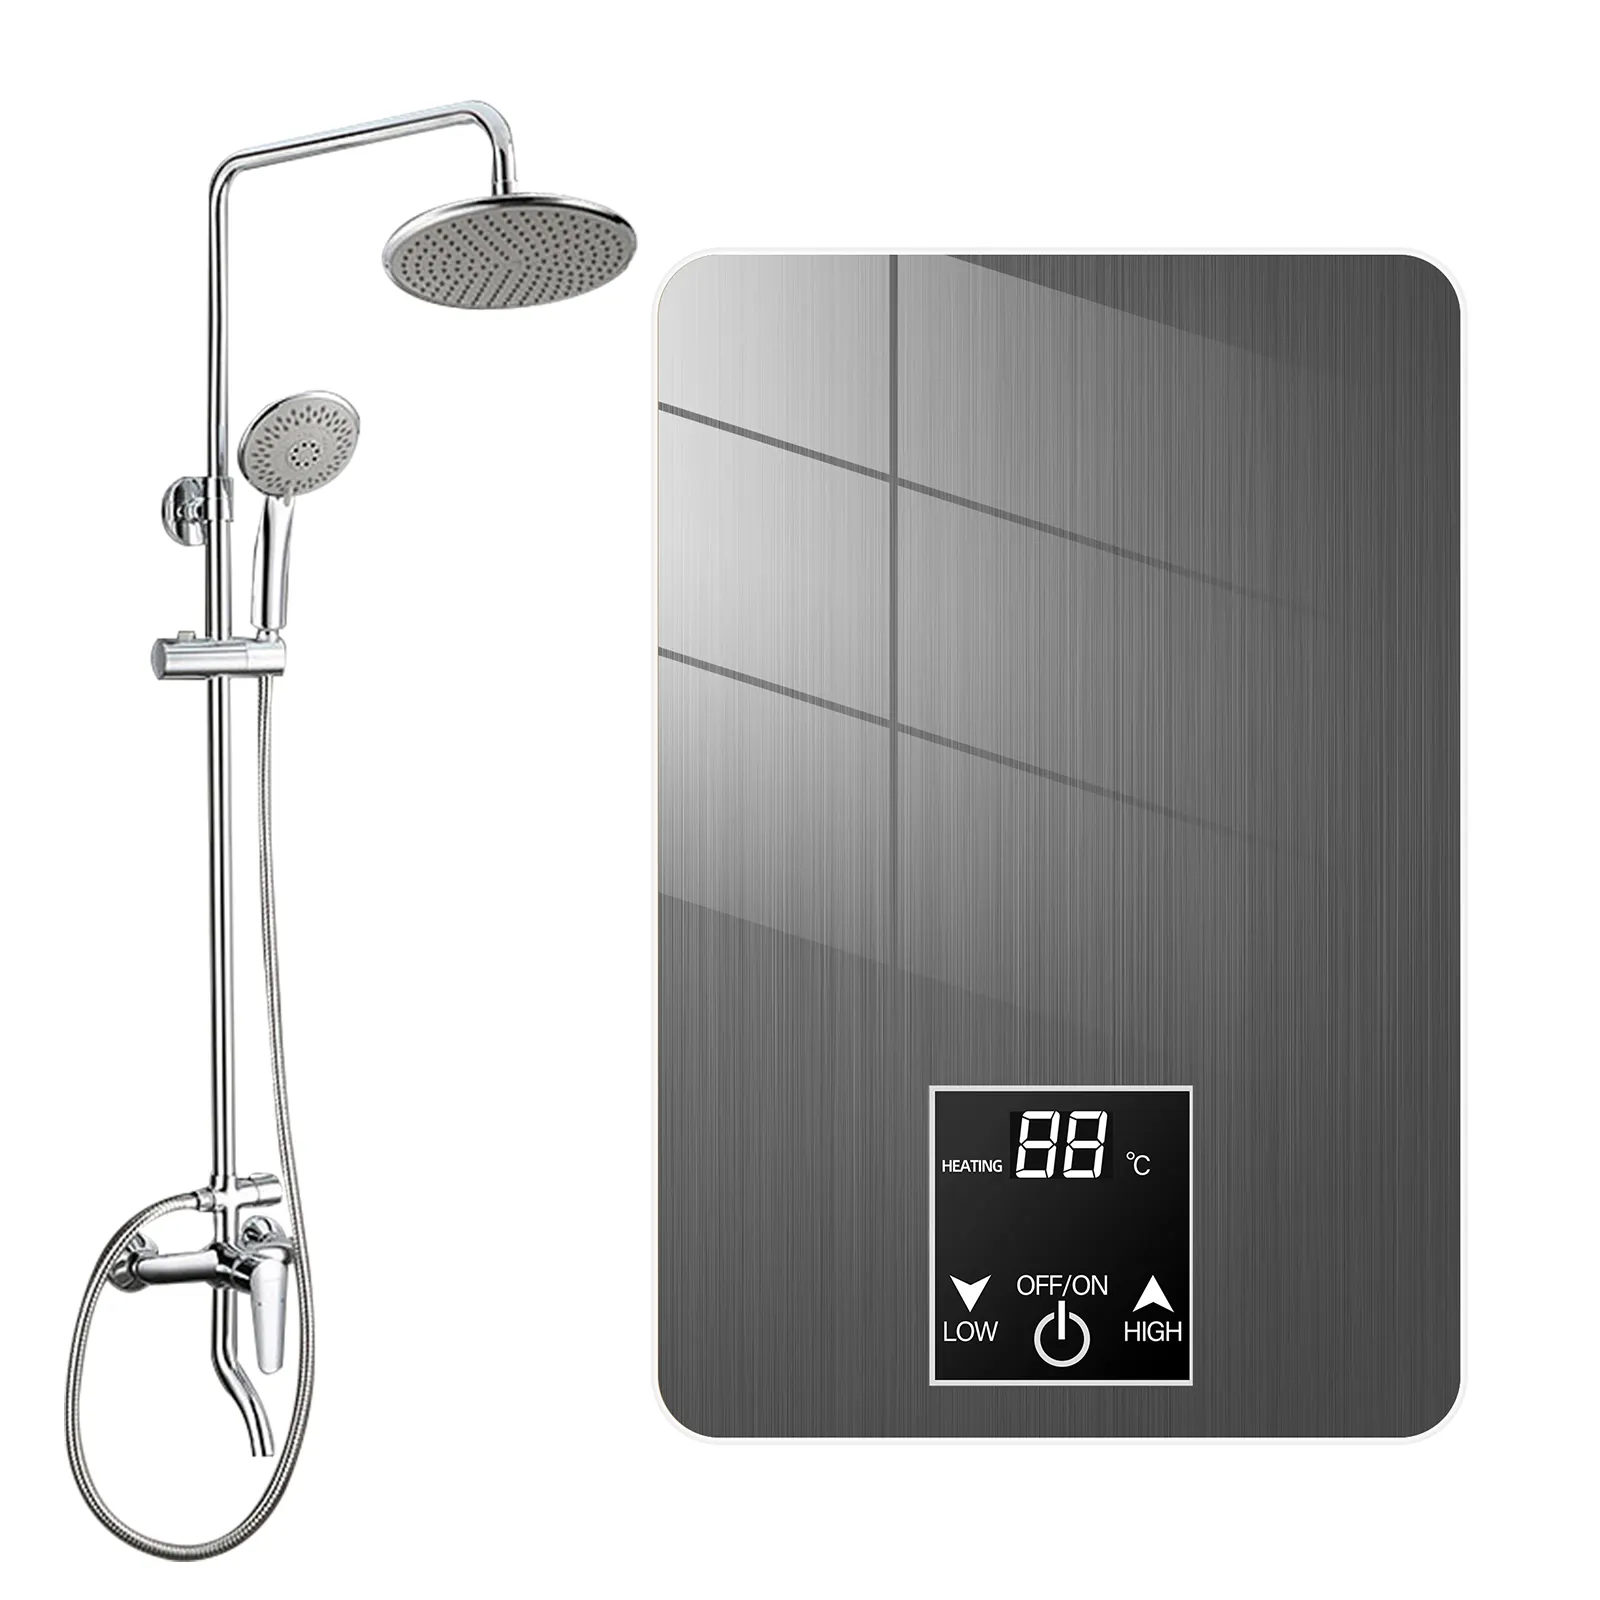 Factory price bathroom electric shower instant electric water heater electric tankless hot water heater